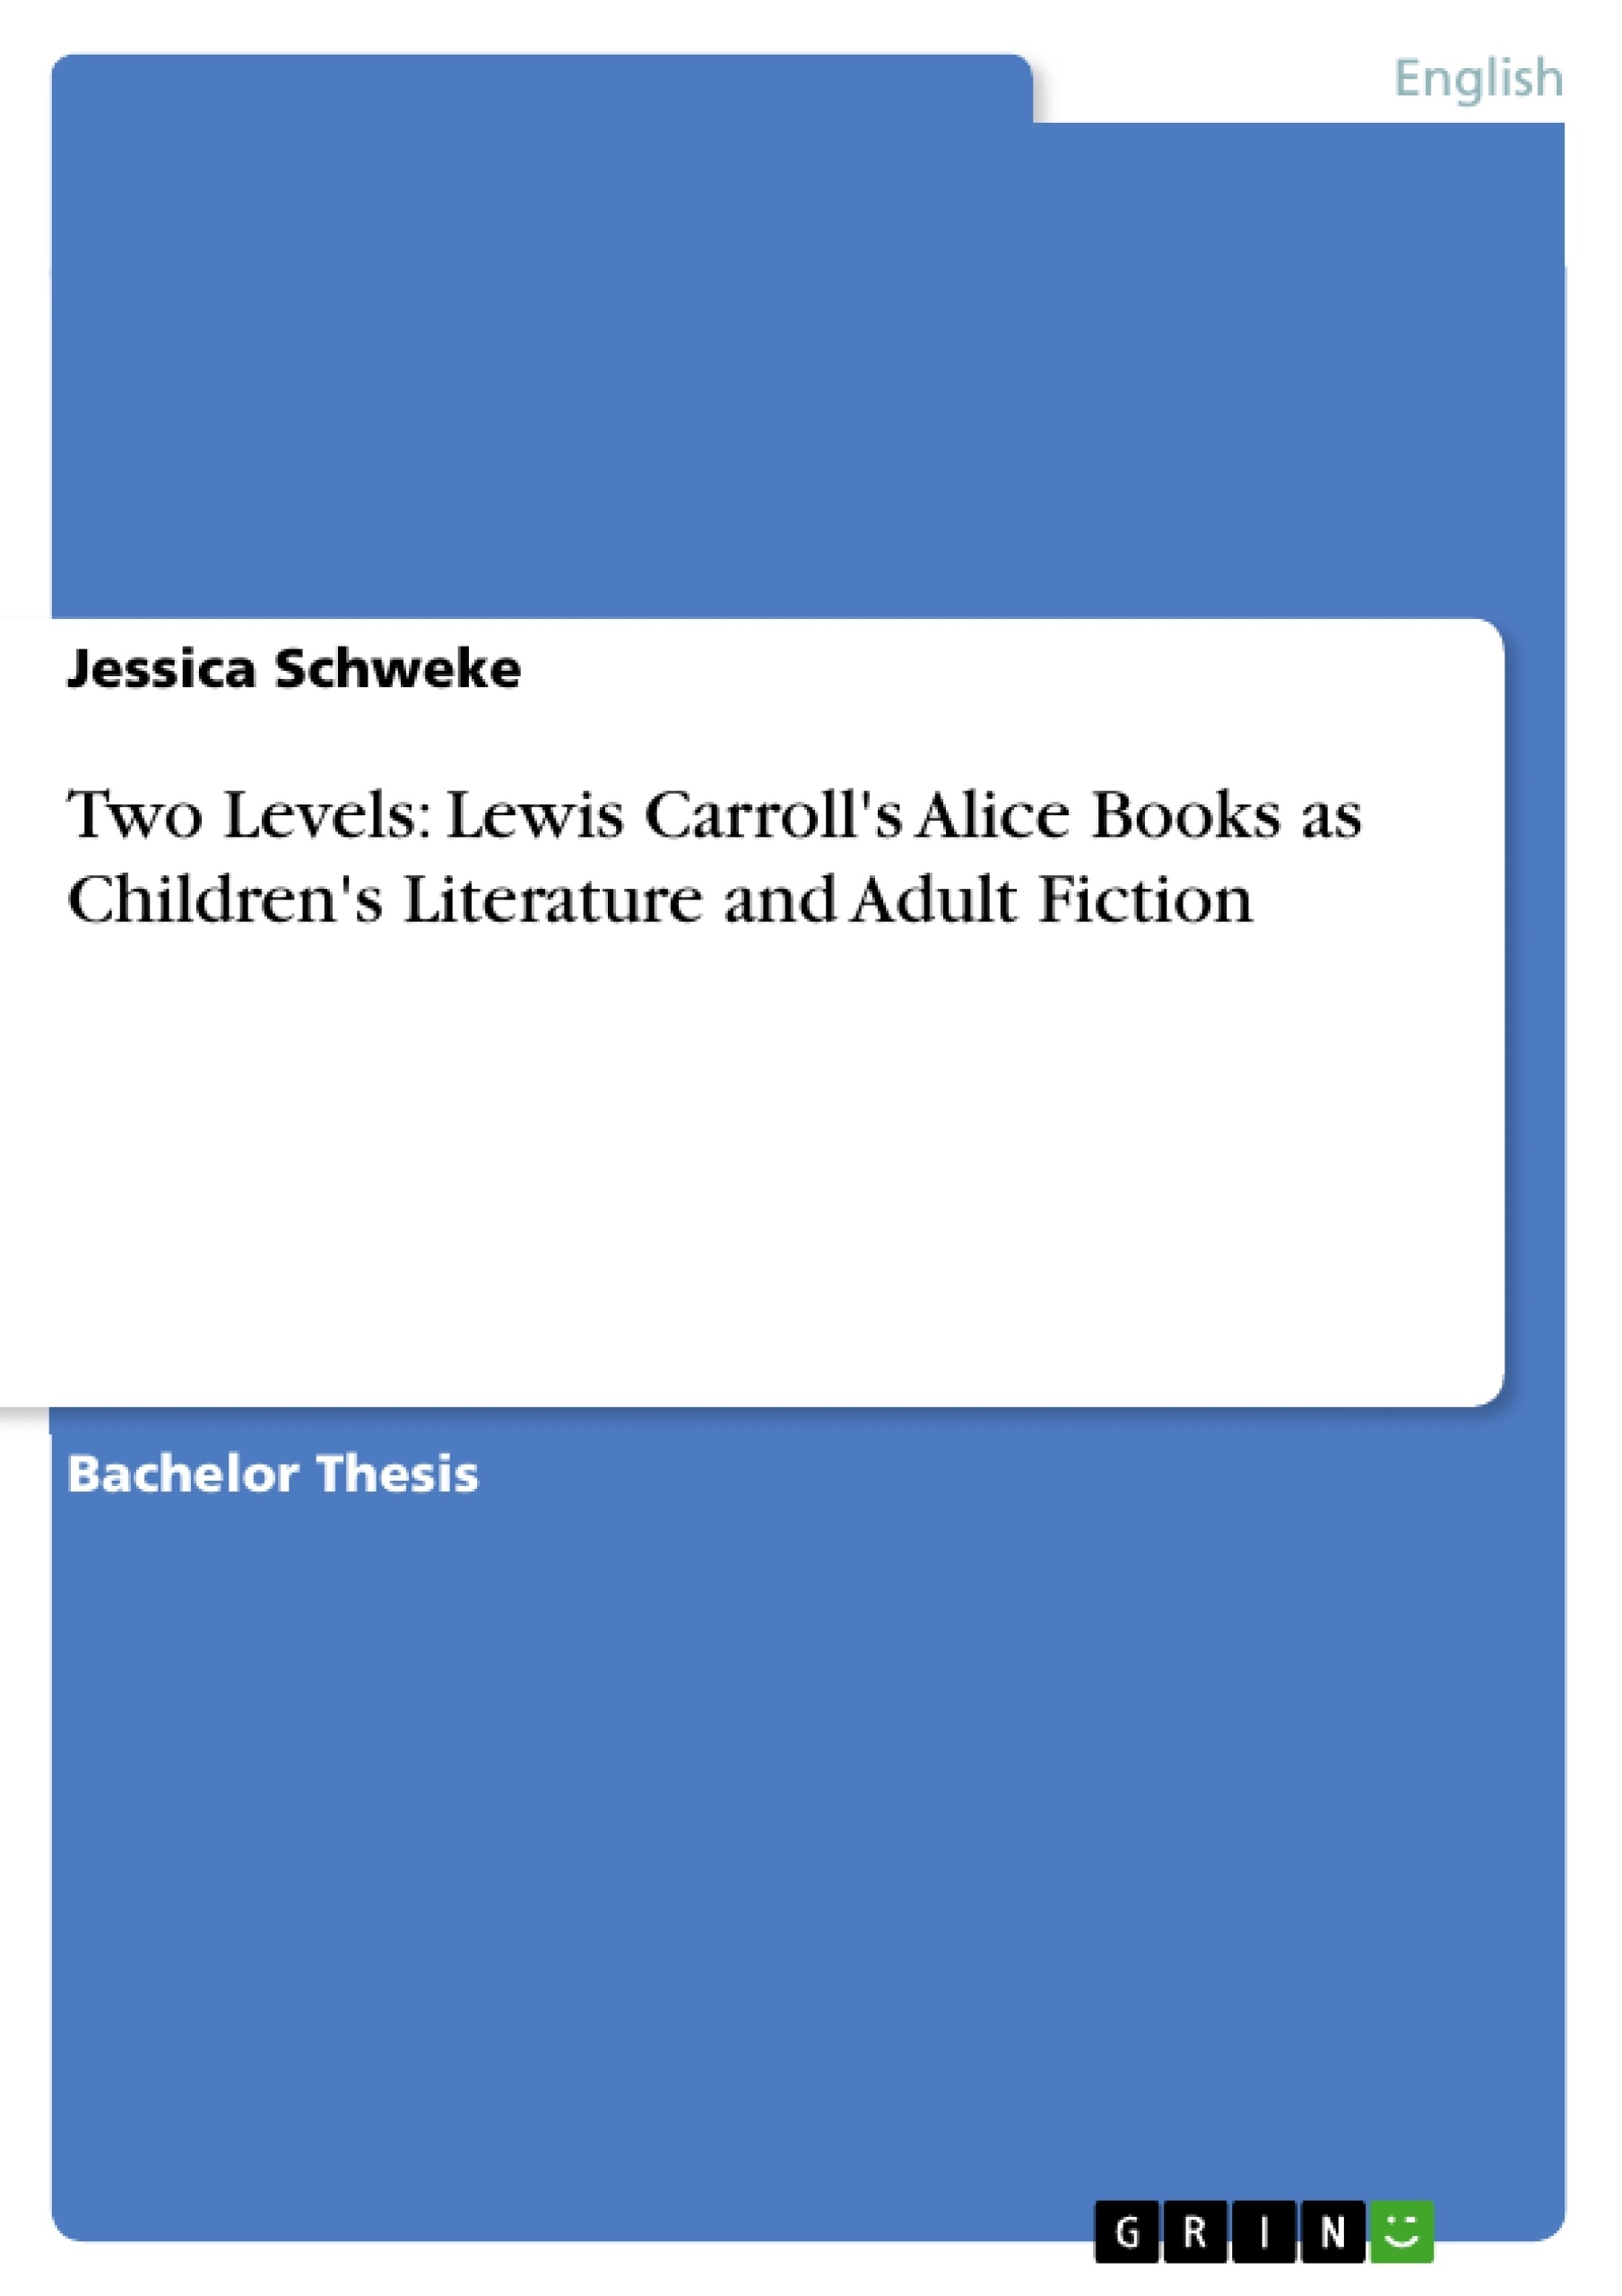 Titel: Two Levels: Lewis Carroll's Alice Books as Children's Literature and Adult Fiction